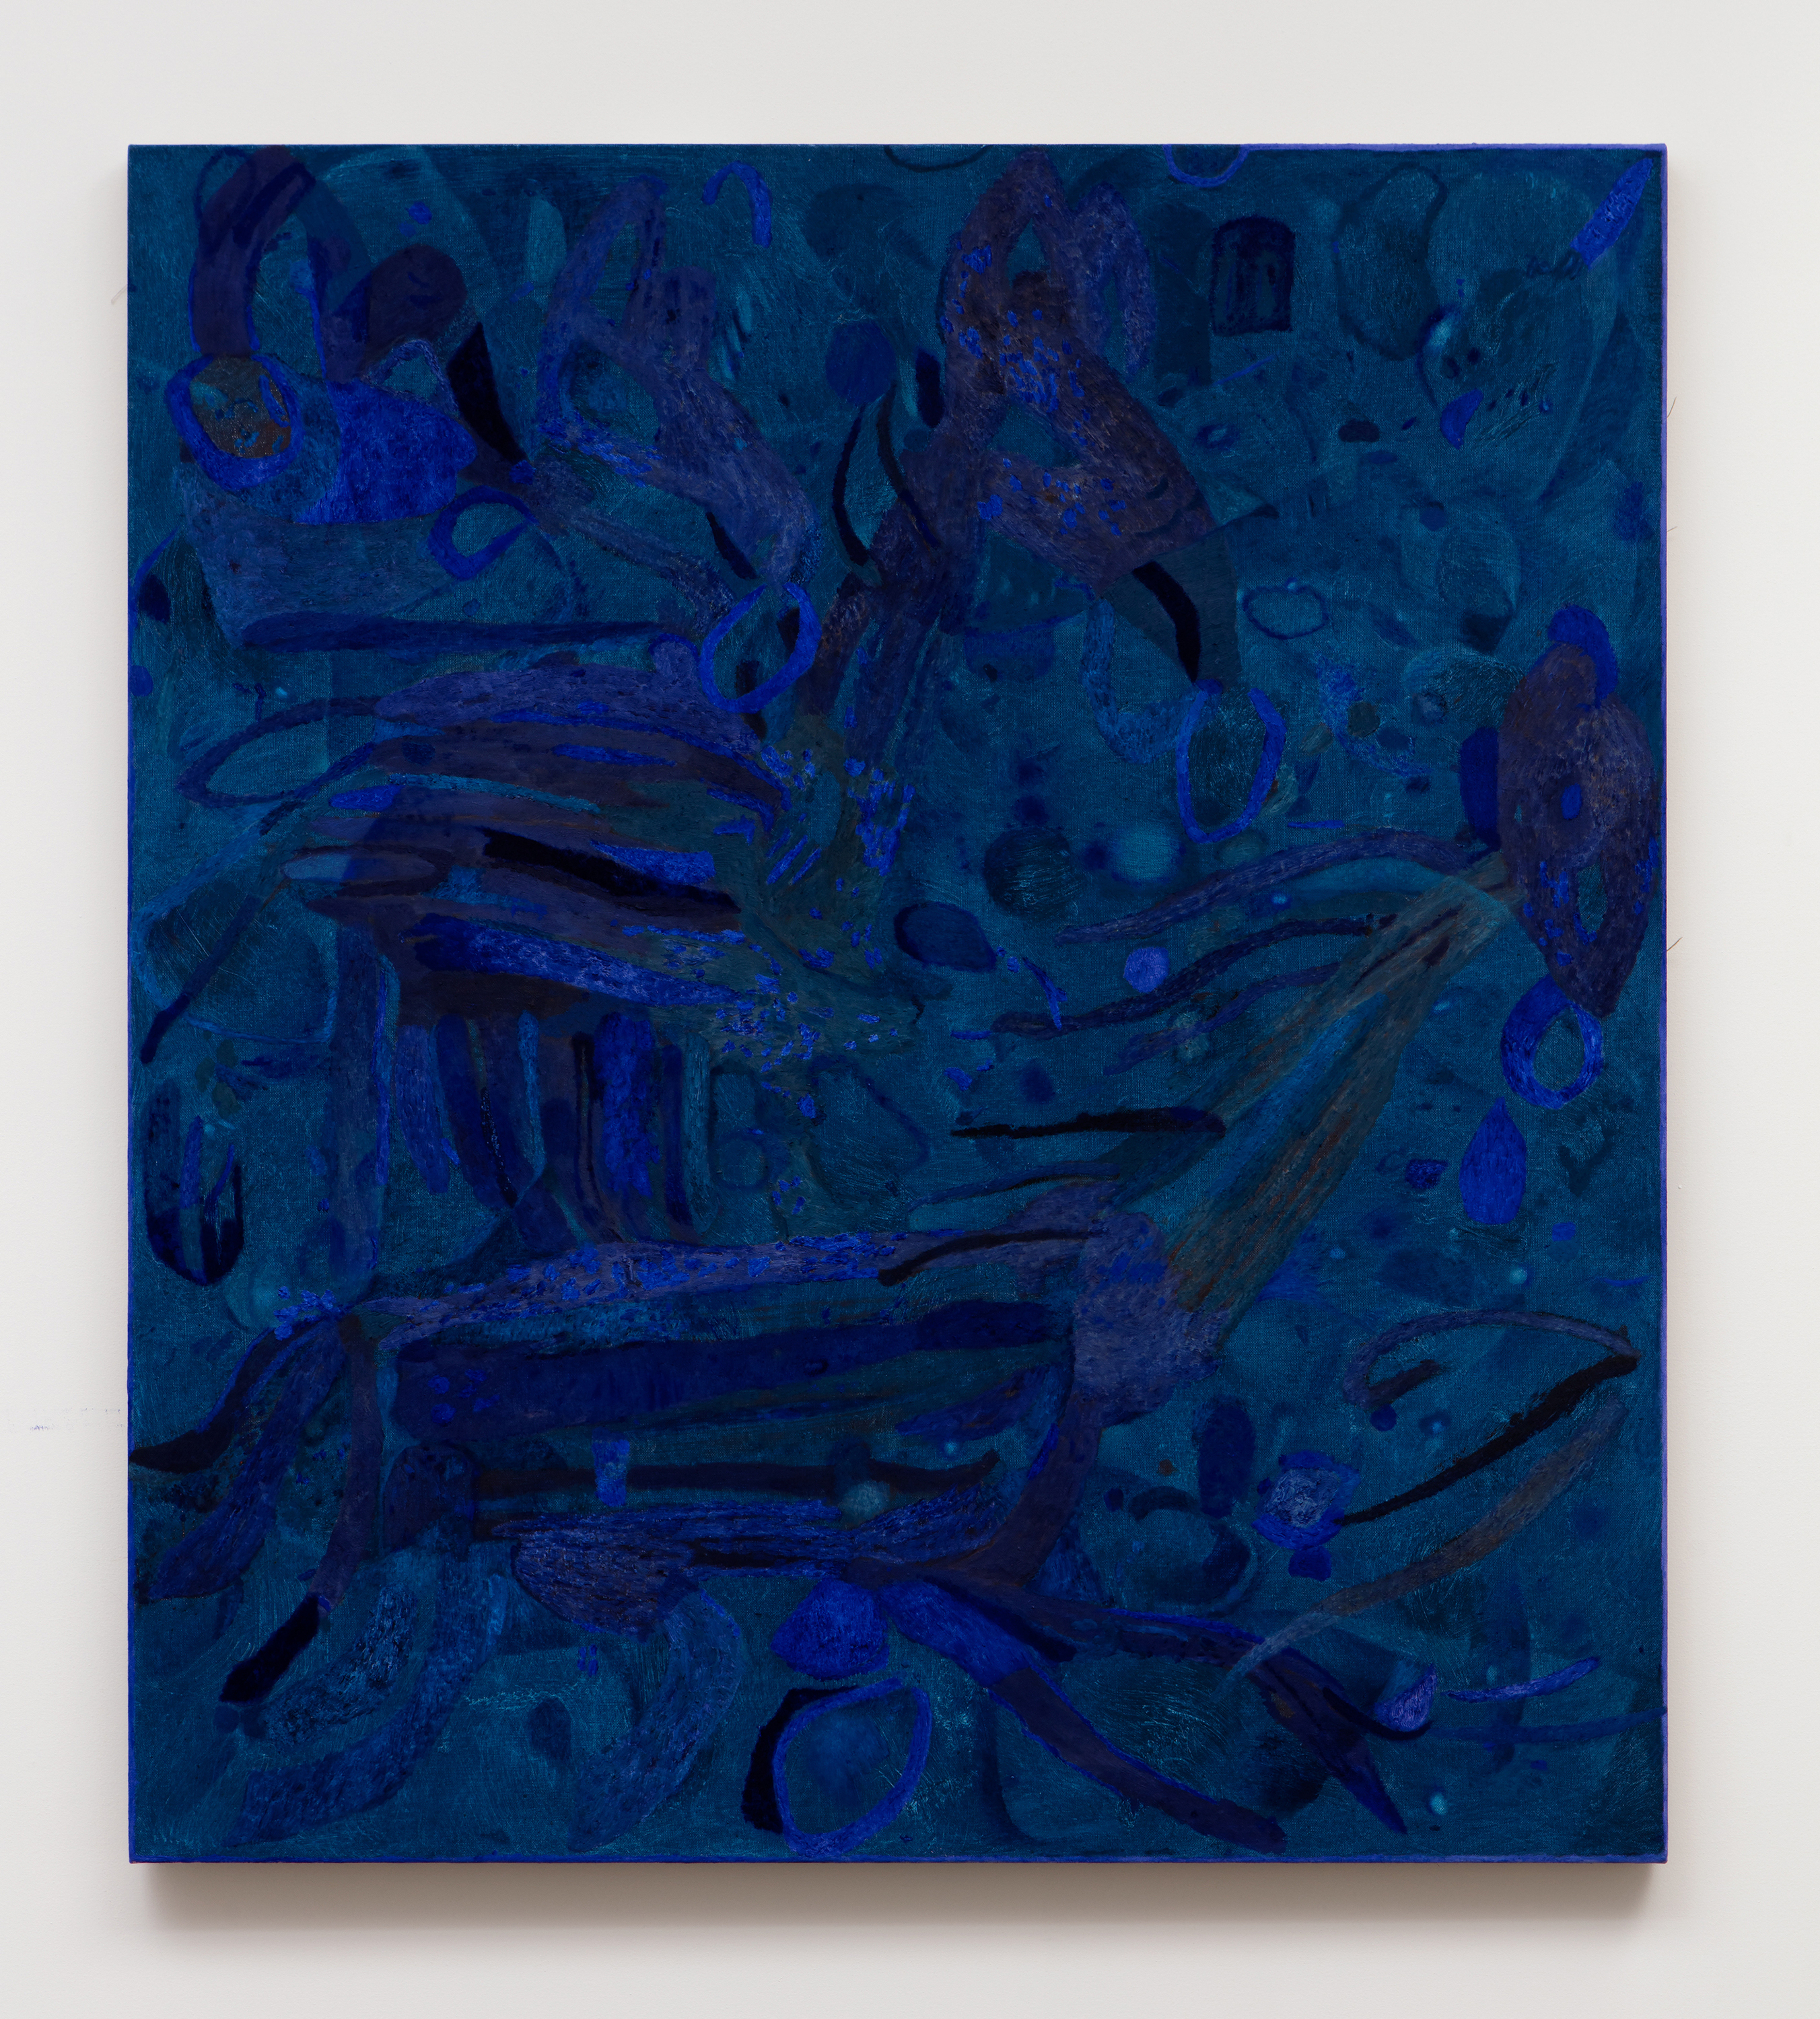 Clare Grill, Jellyfish, 2016, oil on linen, 49" x 44”